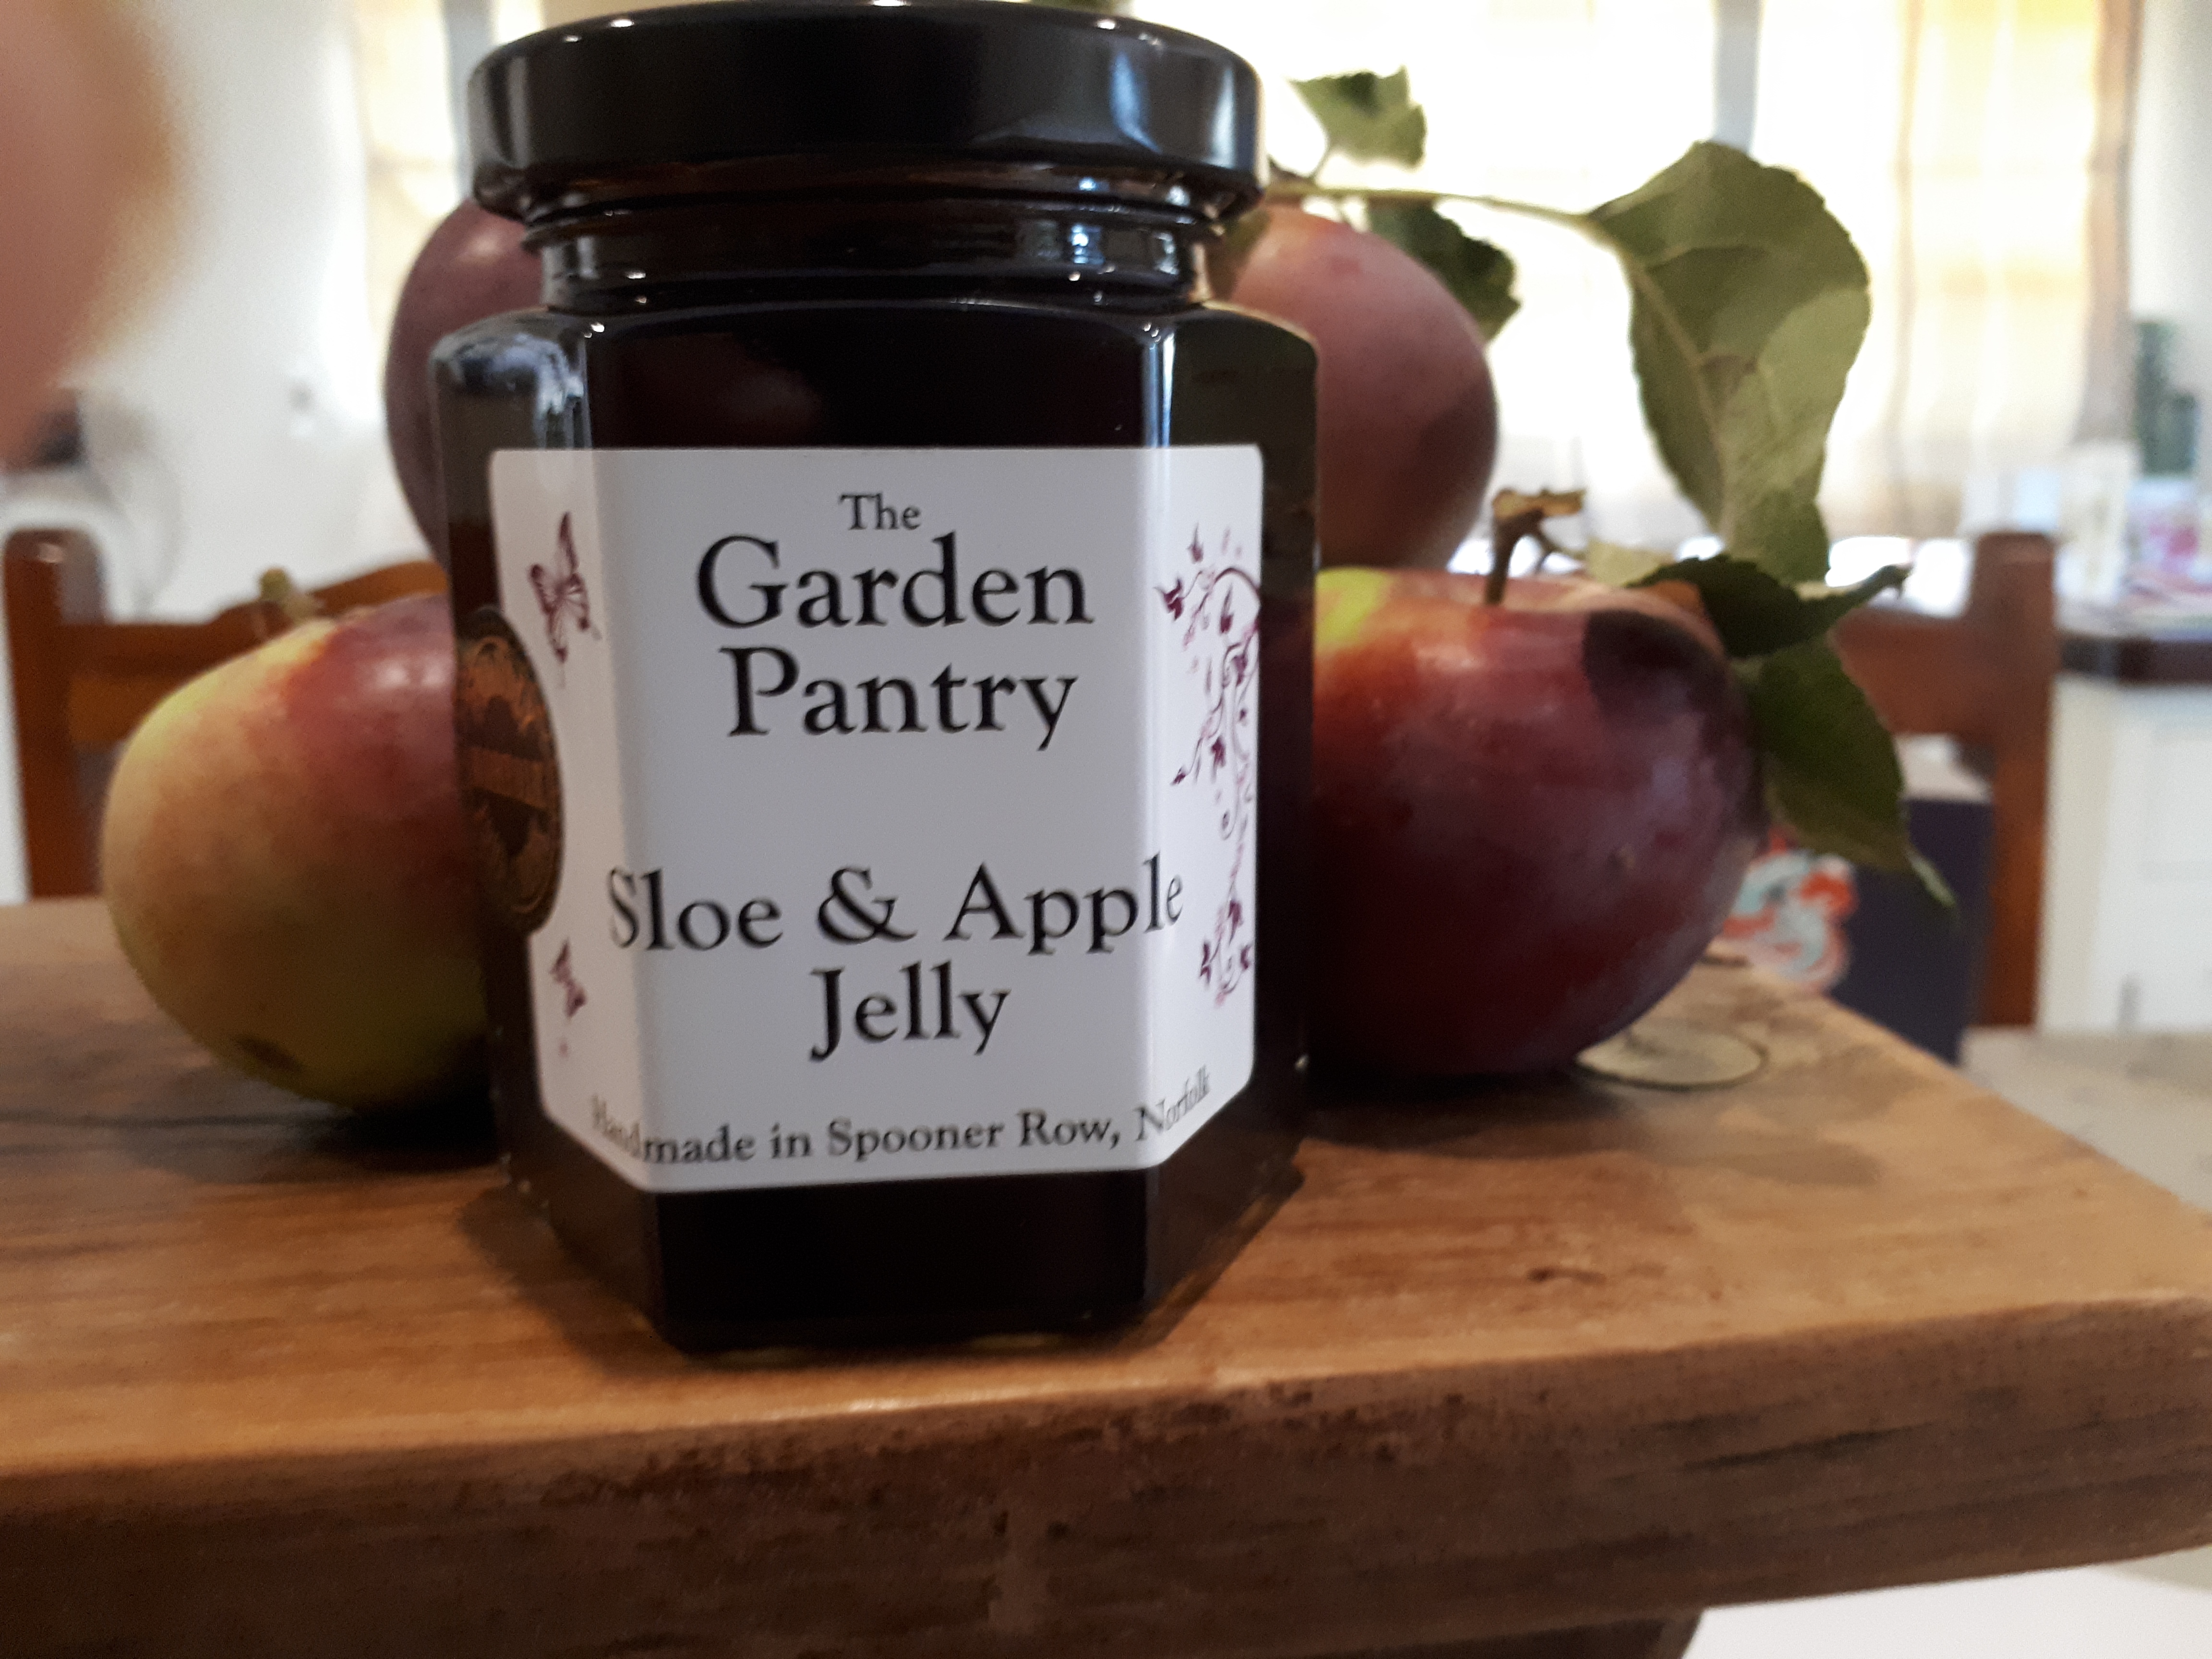 Sloe and apple jelly